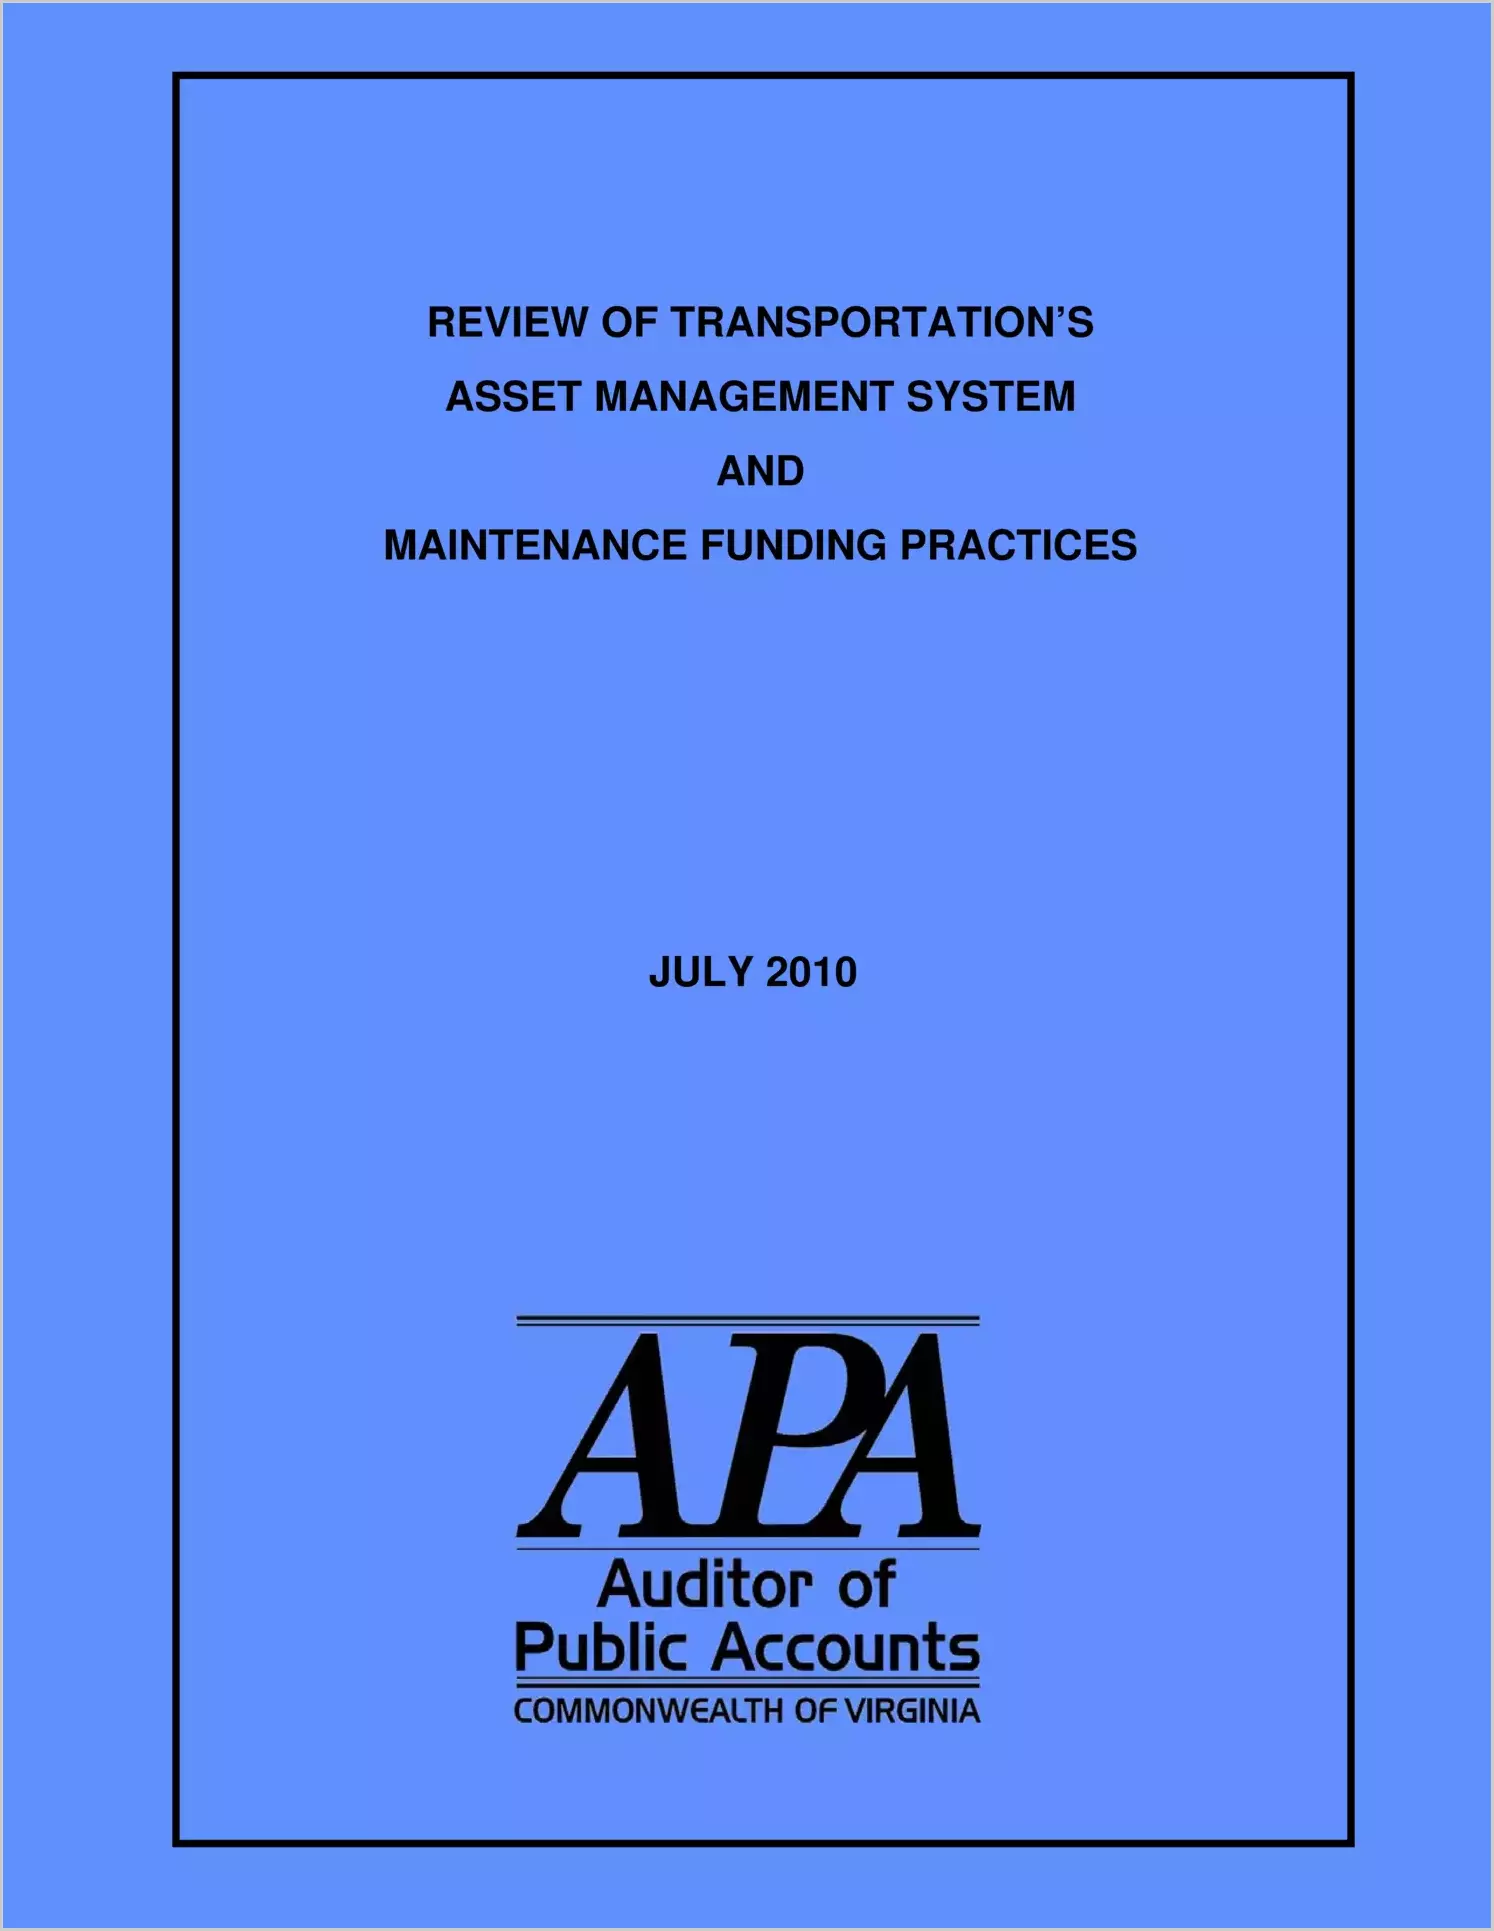 Review of Transportation's Asset Management System and Maintenance Funding Practices as of July 2010